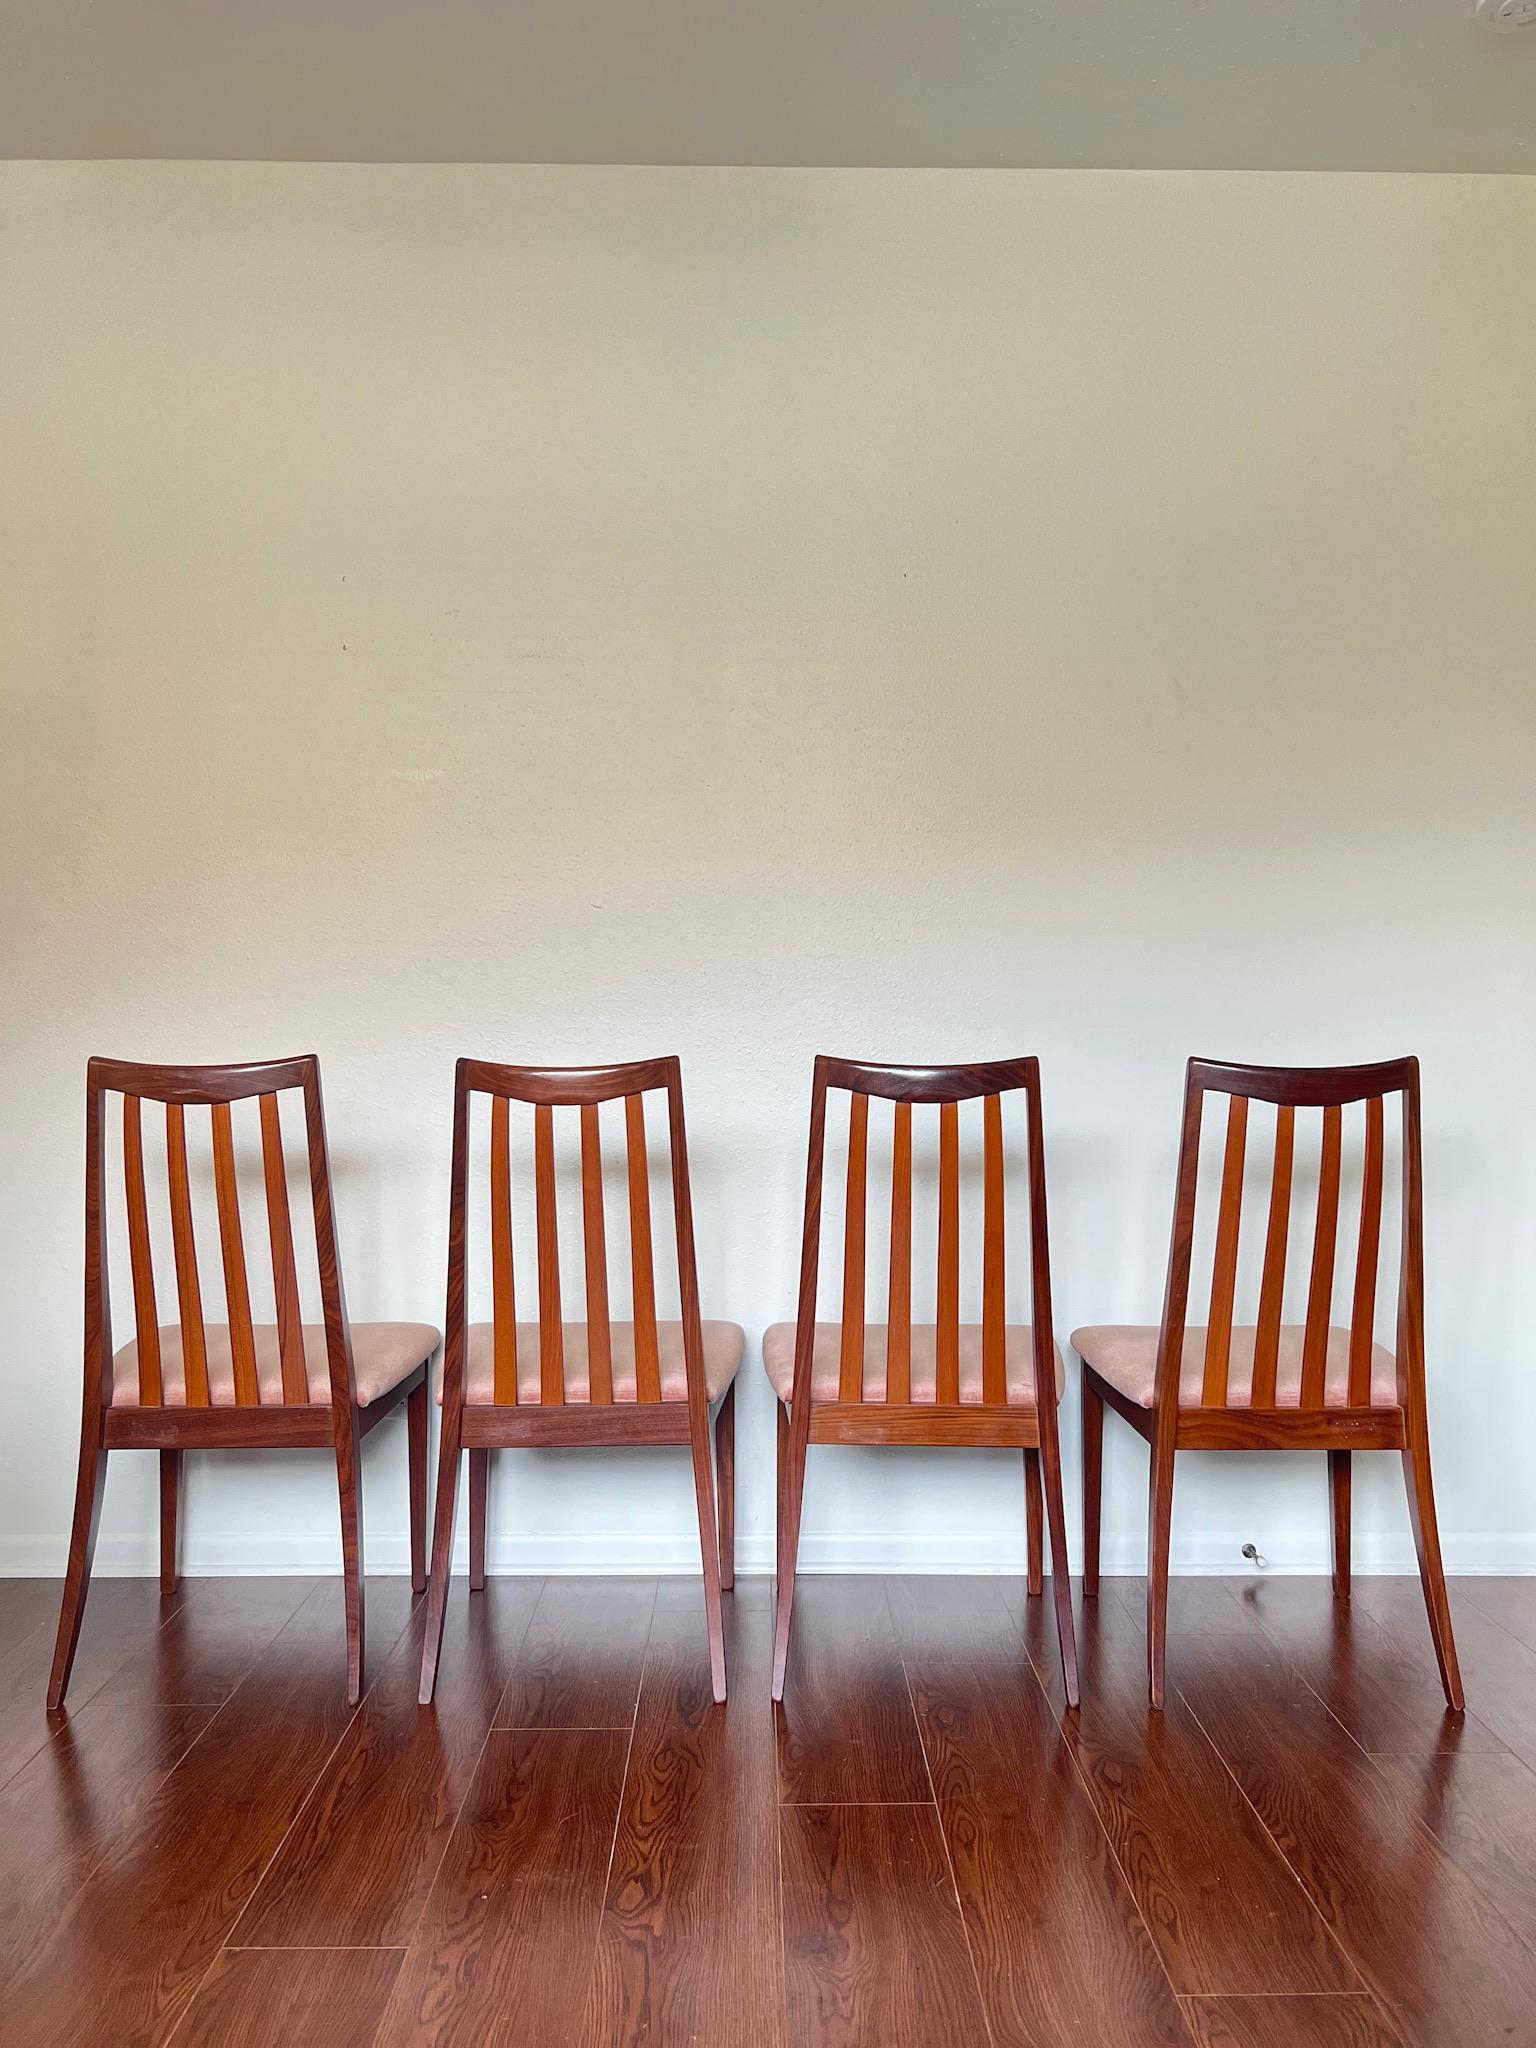 Teak Lovely Set of 4 Vintage Mid-Century Modern Dining Chairs by G-Plan